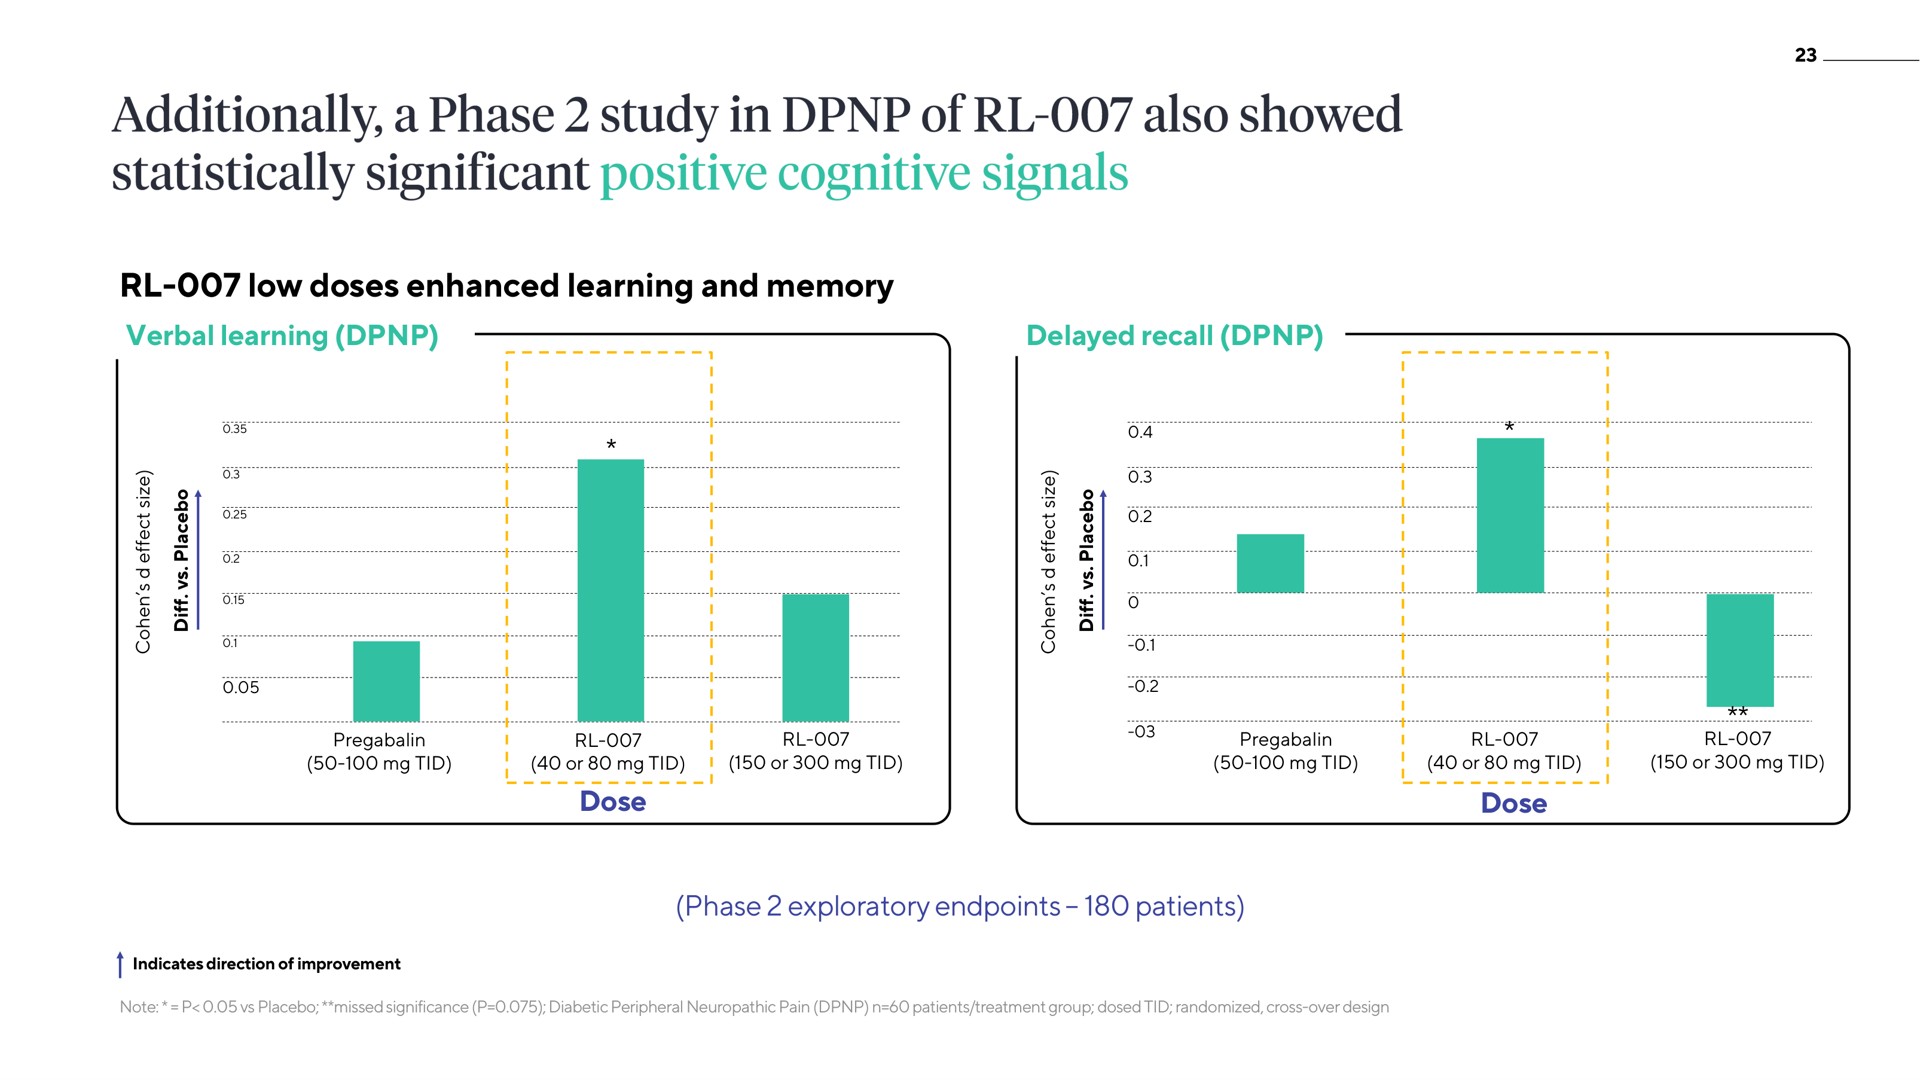 low doses enhanced learning and memory verbal learning delayed recall dose phase exploratory patients dose additionally a study in of also showed statistically significant positive cognitive signals | ATAI